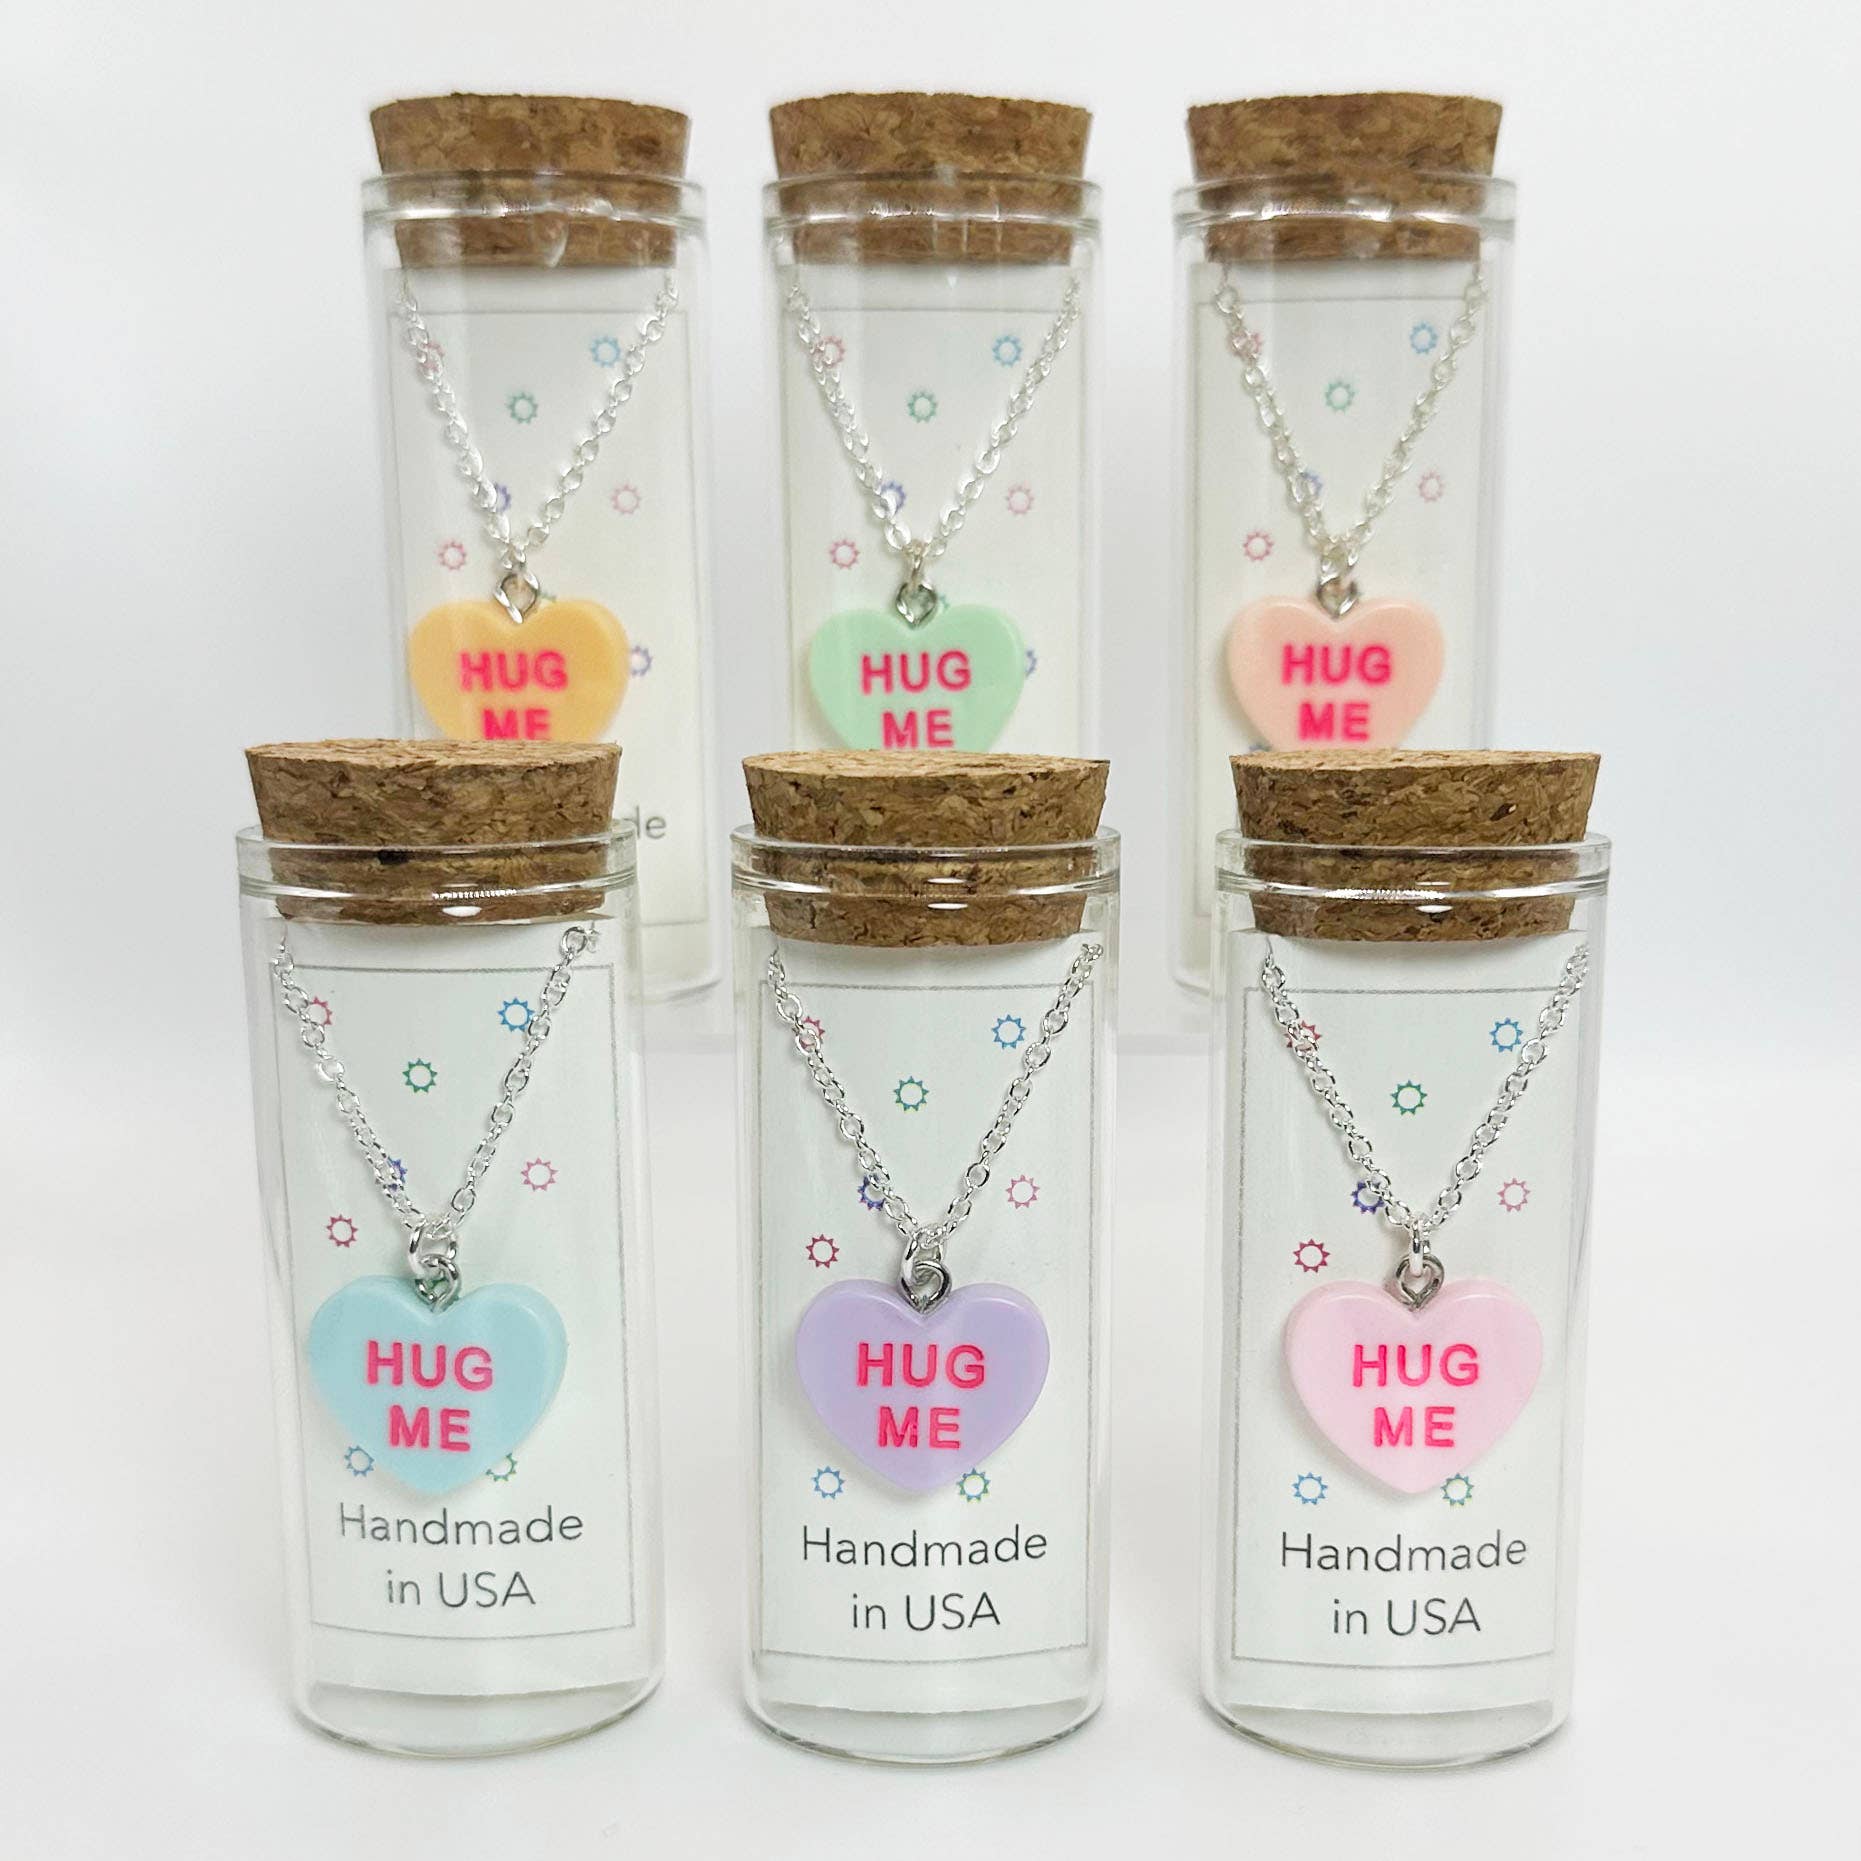 Valentine Conversation Heart Necklaces in a Bottle- Set of 6: BE MINE - Something about Sofia